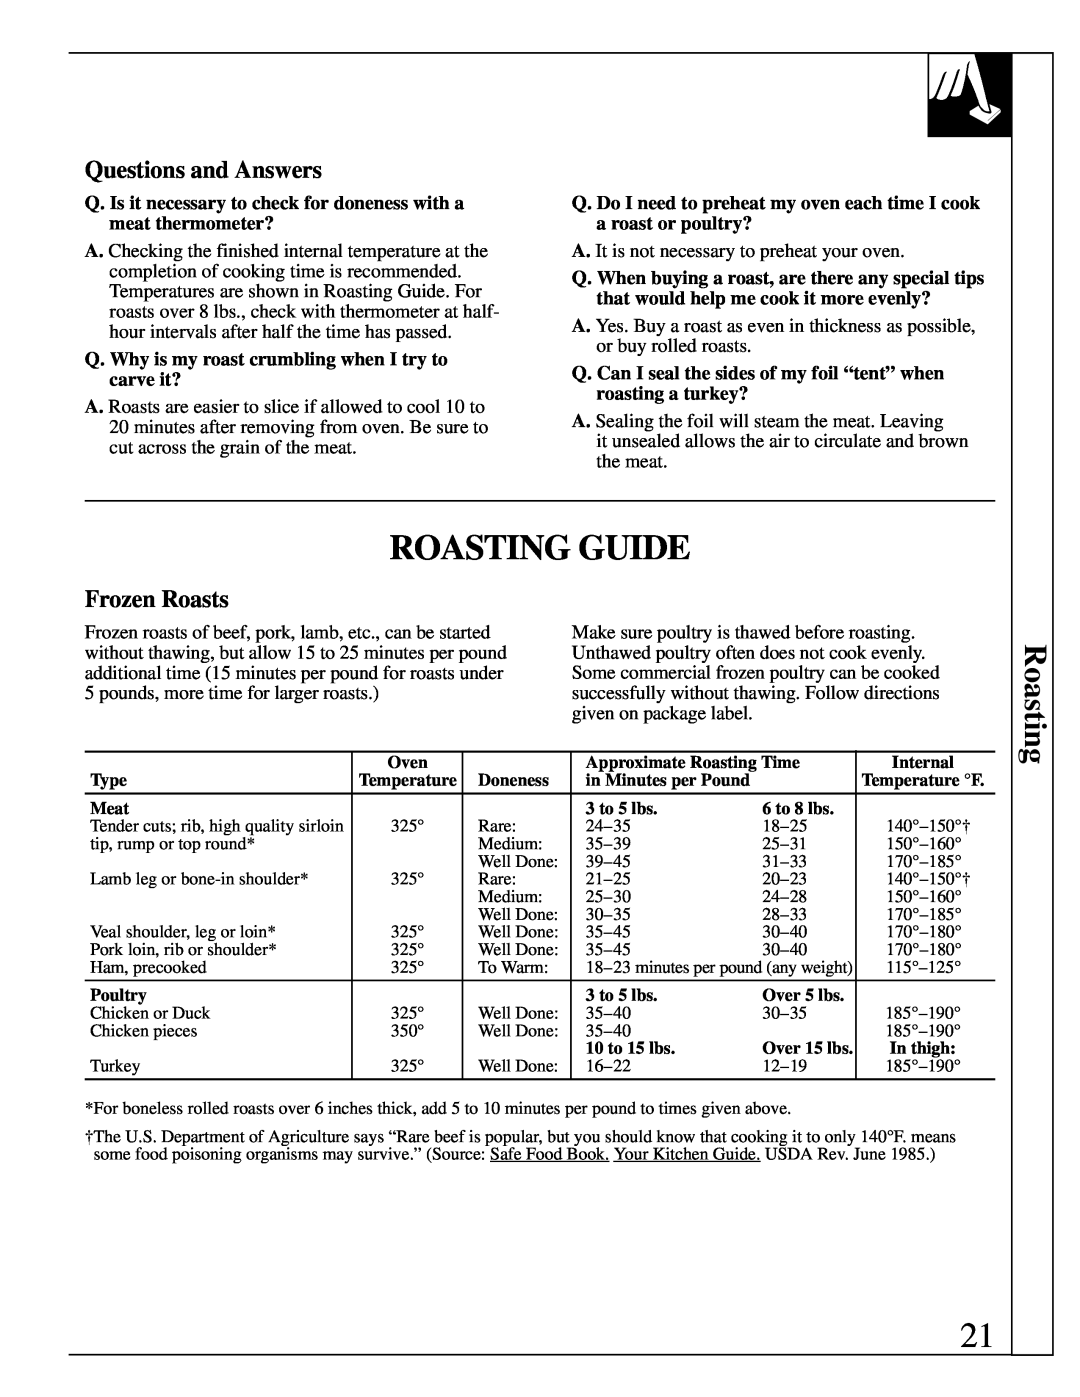 GE JGBP38 installation instructions Roasting Guide, Questions and Answers, Frozen Roasts 